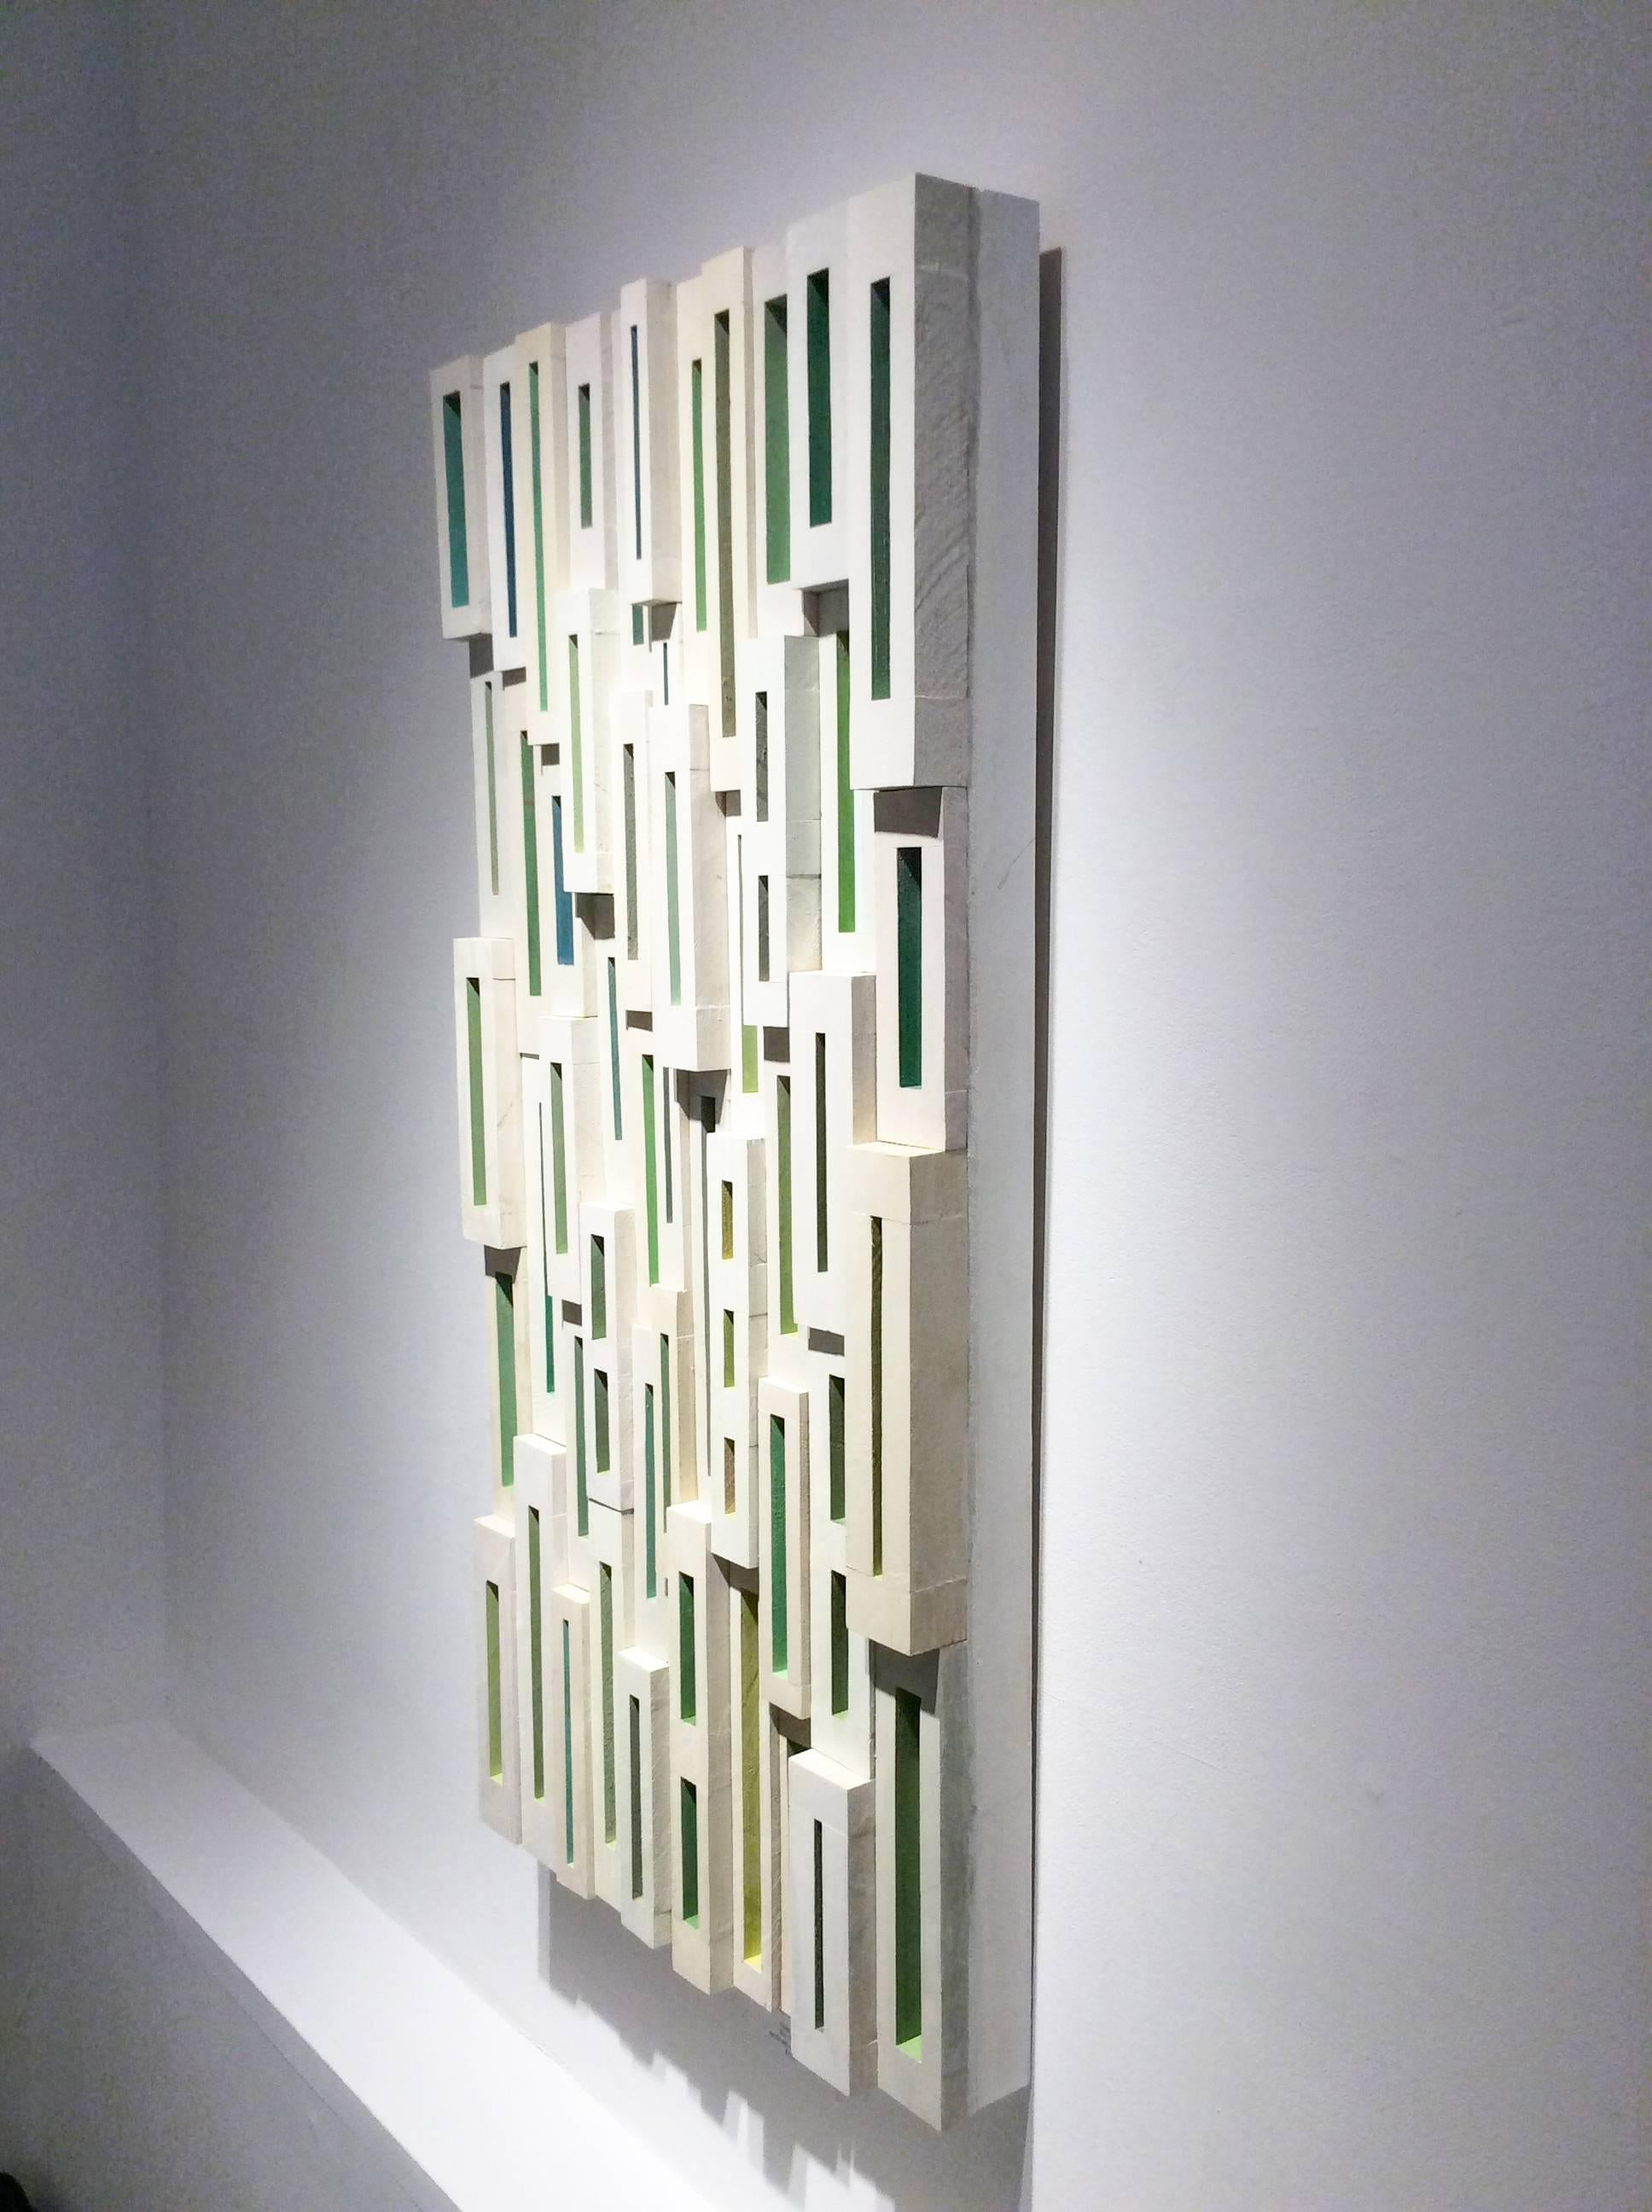 Glimpses (Abstract Mid-Century Modern 3-D Wall Sculpture in Green & White) - Brown Abstract Sculpture by Stephen Walling